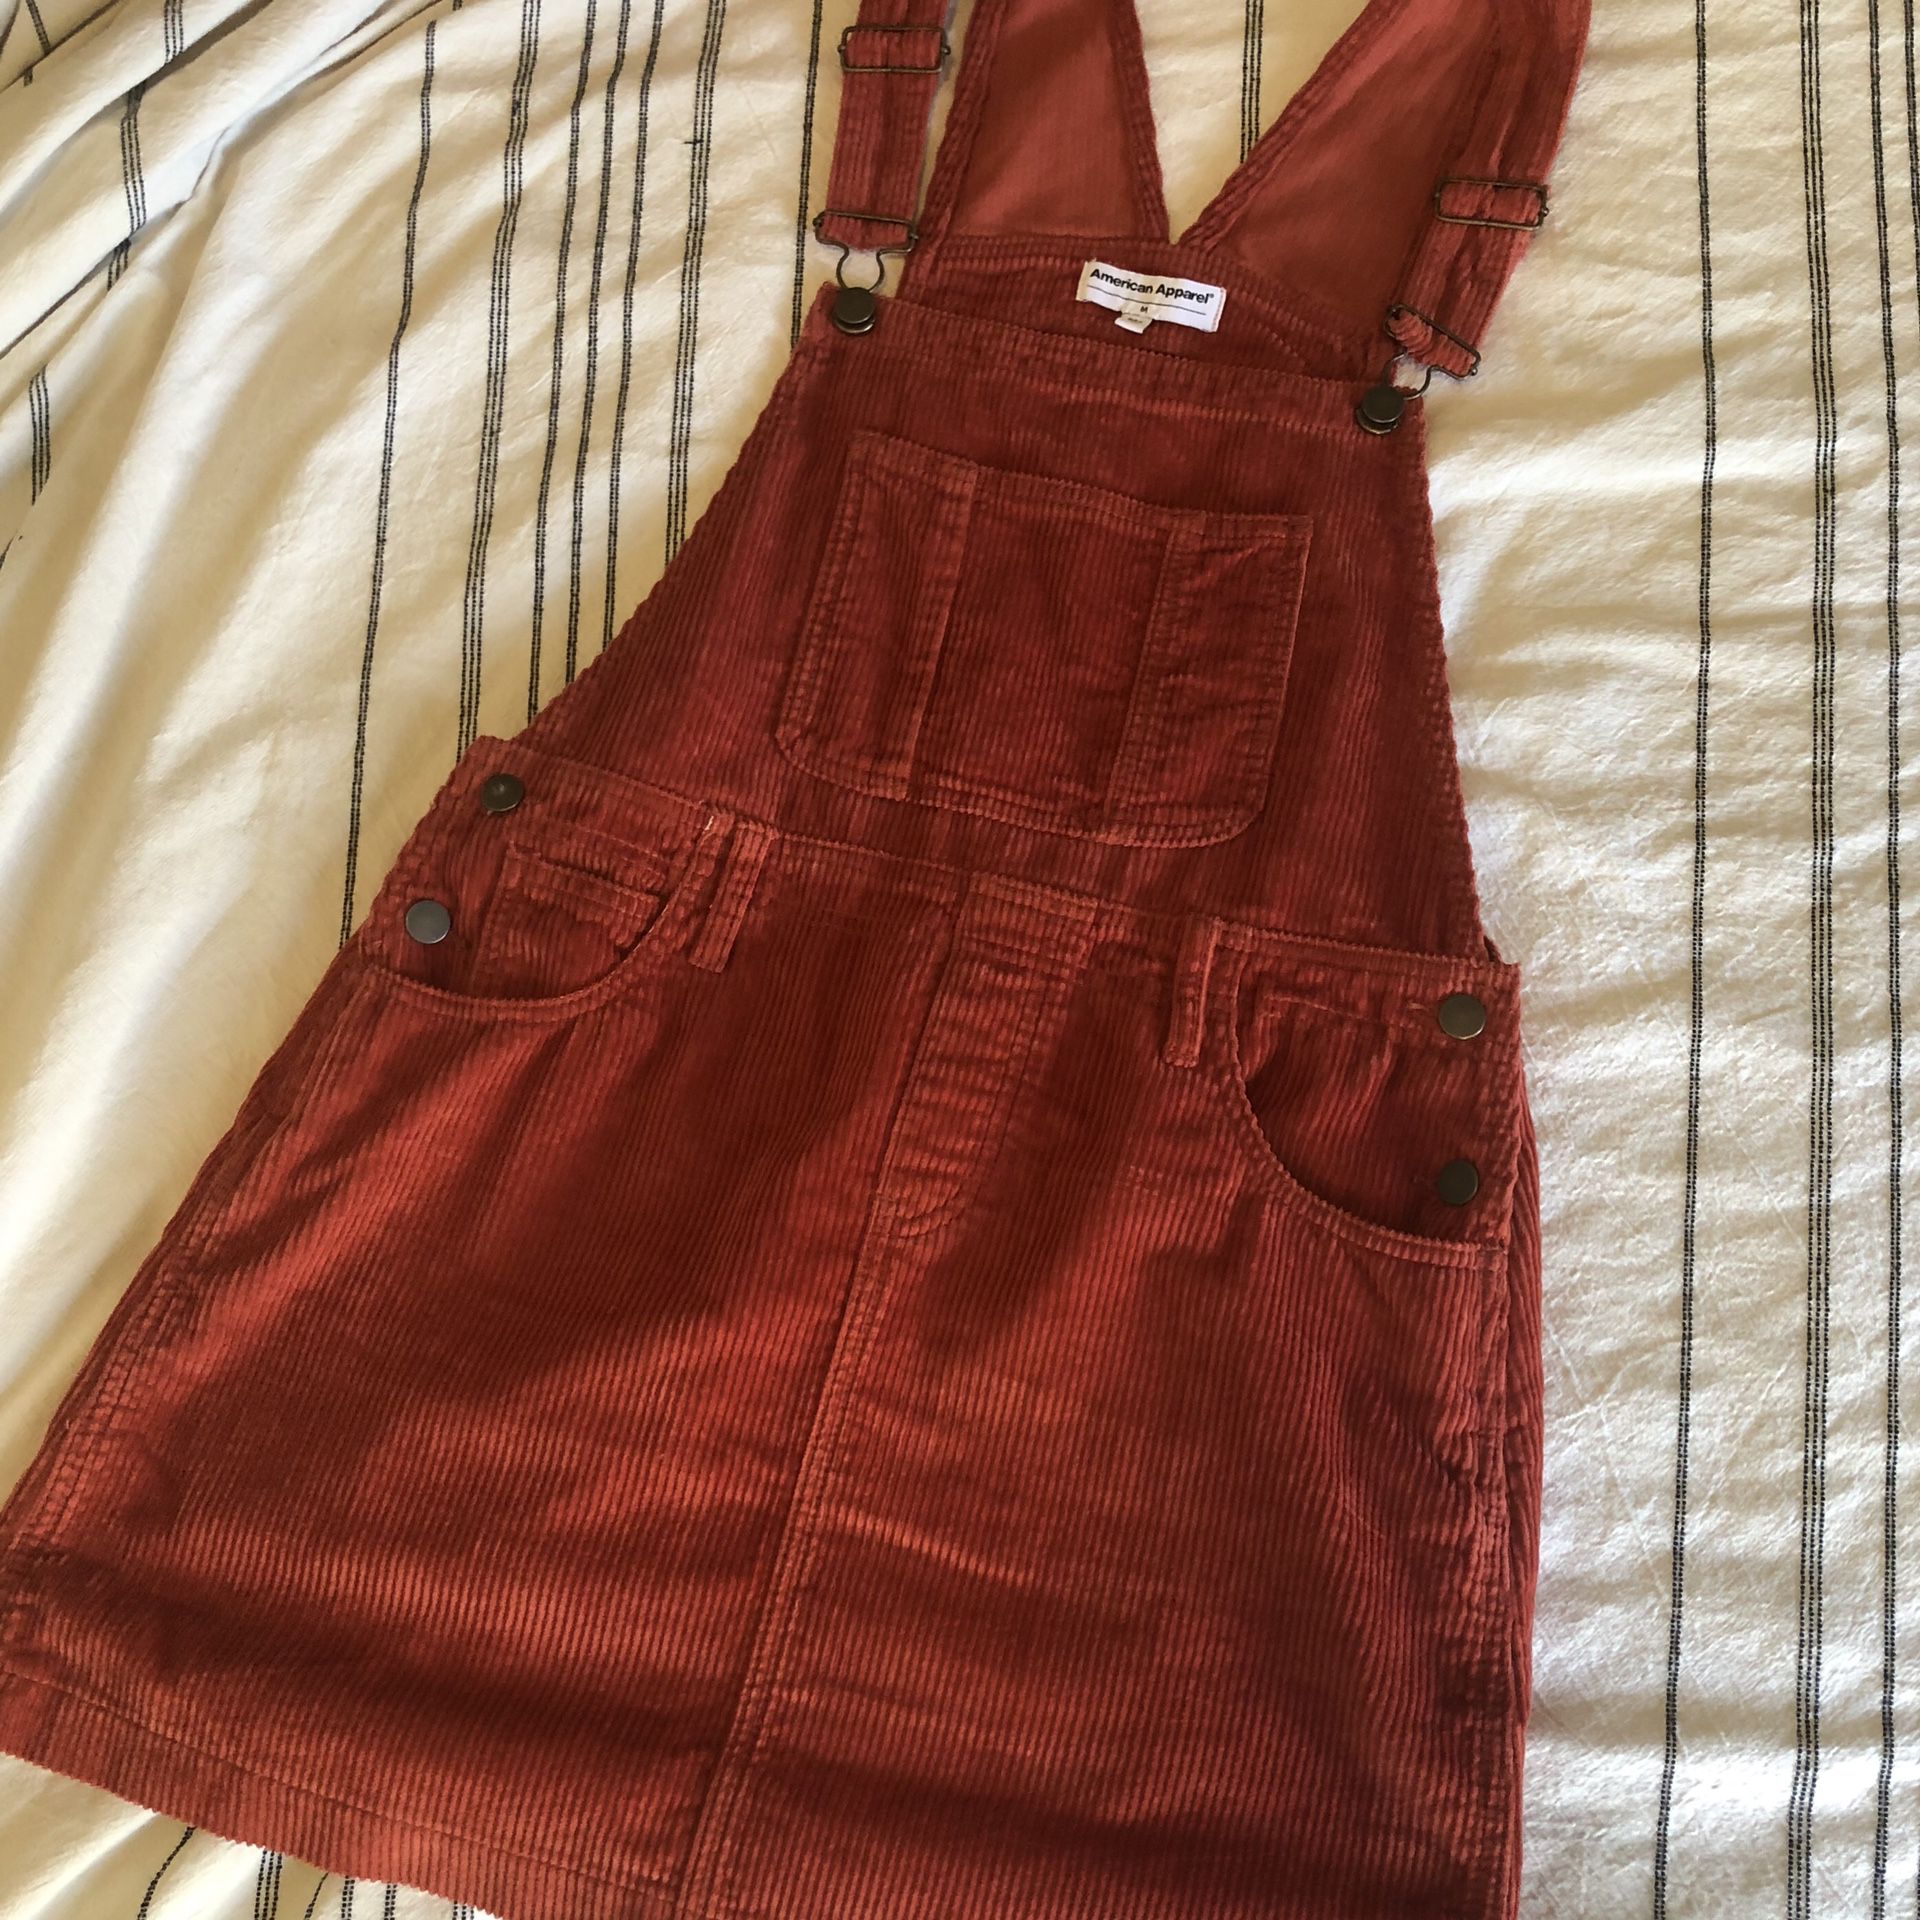 American Apparel Brick Red Corduroy Overall Dress